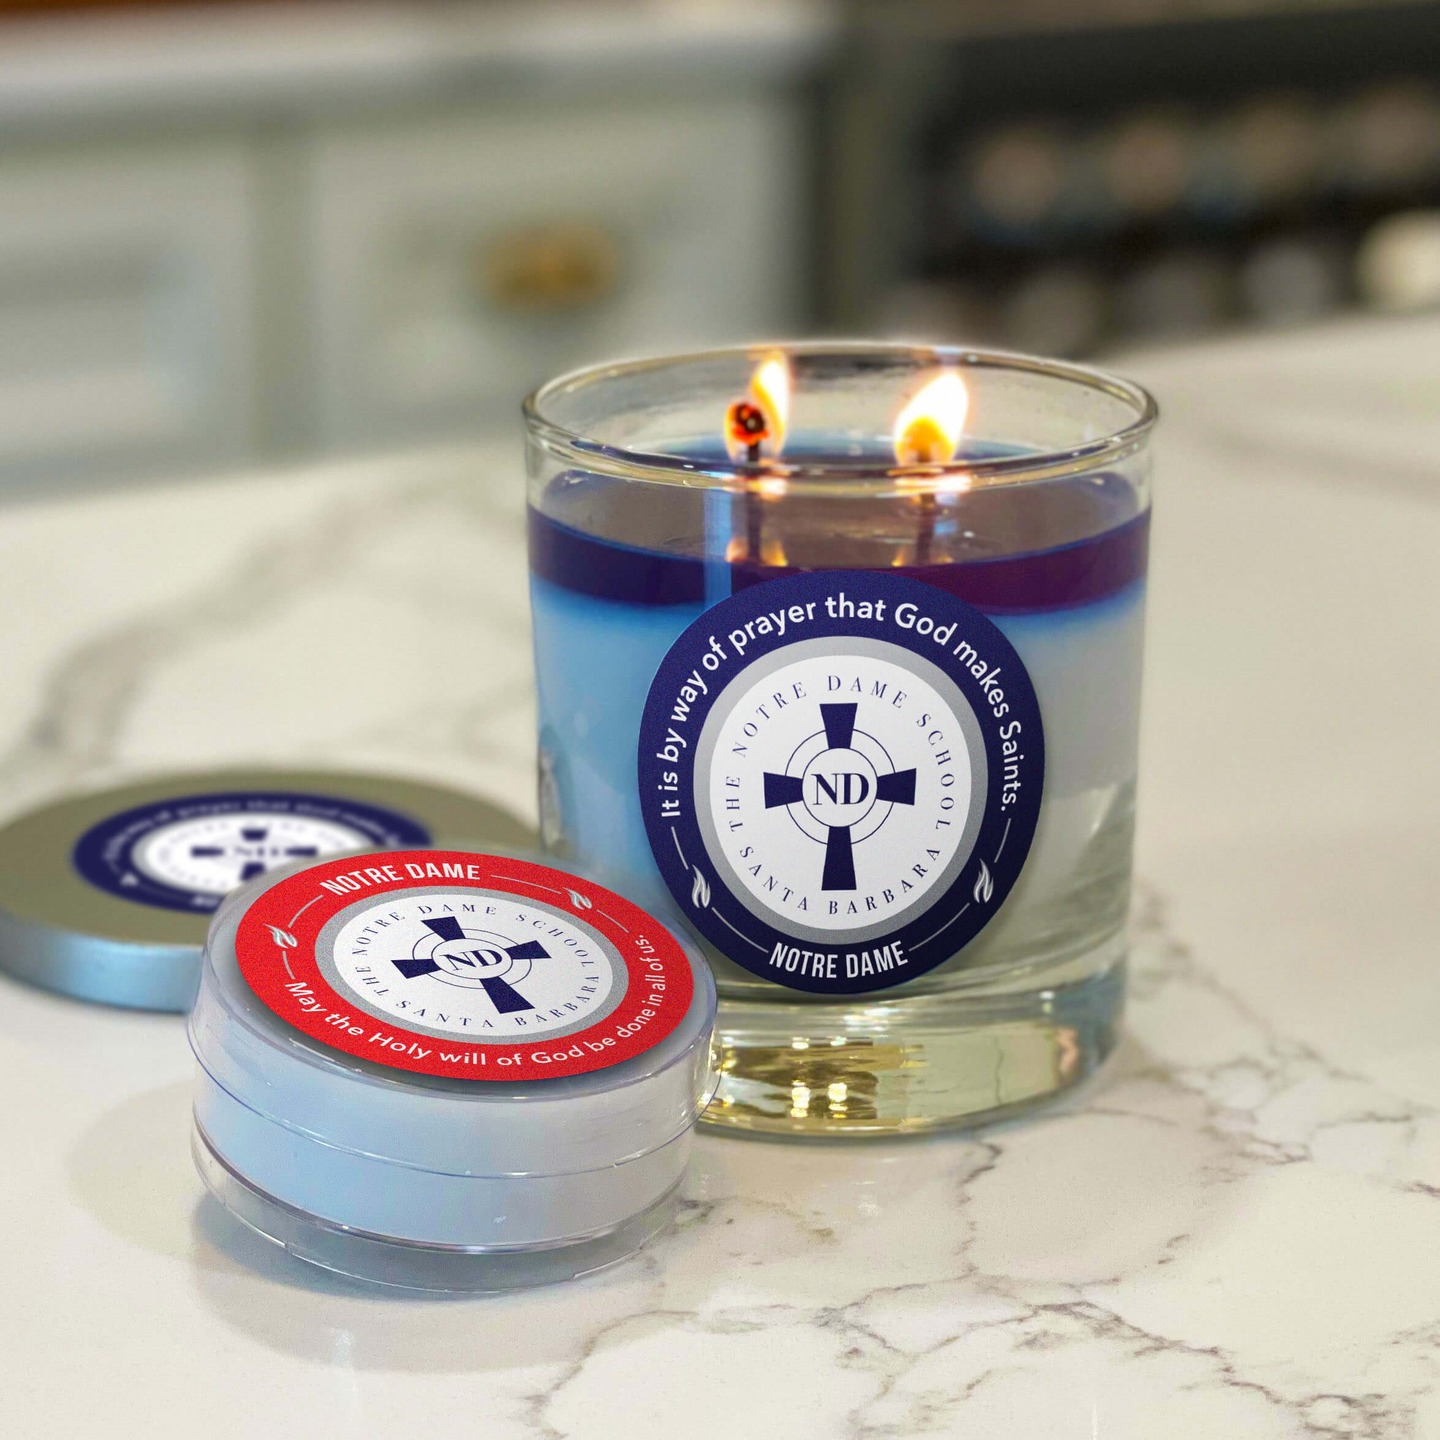 Get Branded Eco-Friendly Magic Color Candles For Aurora, OH Fundraisers